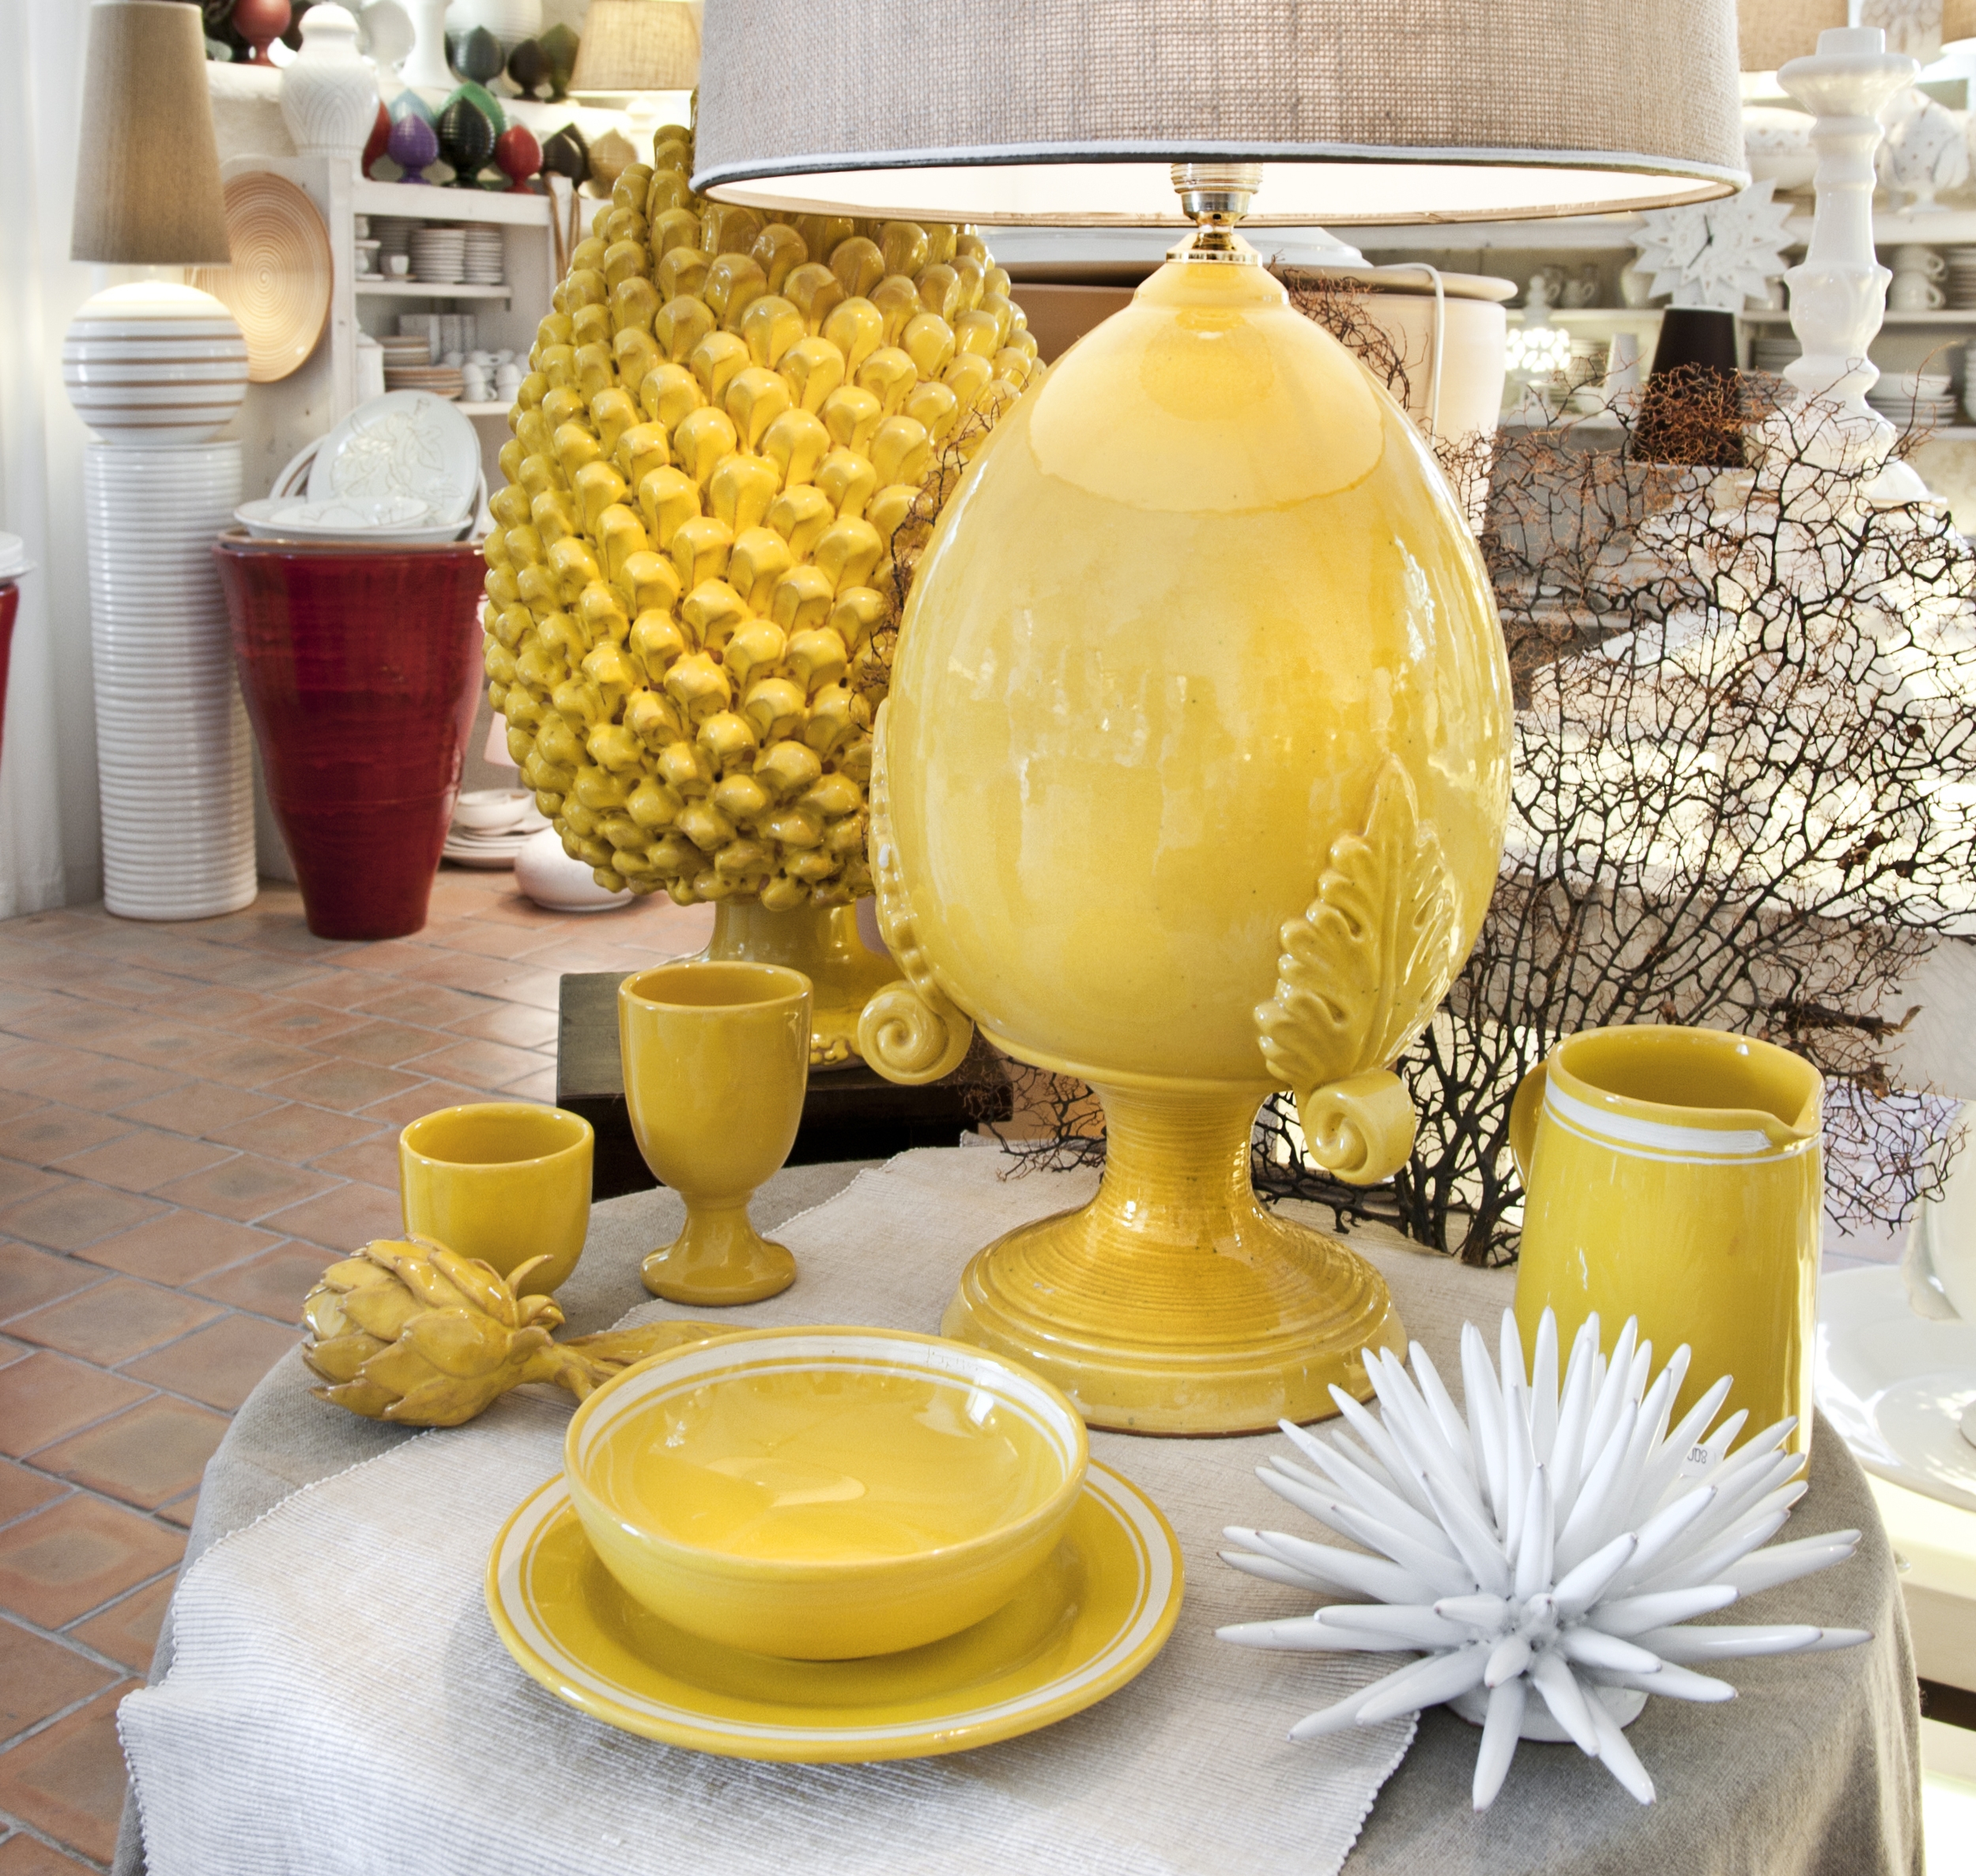 GdS - Enza Fasano yellow lamp and accents.jpg